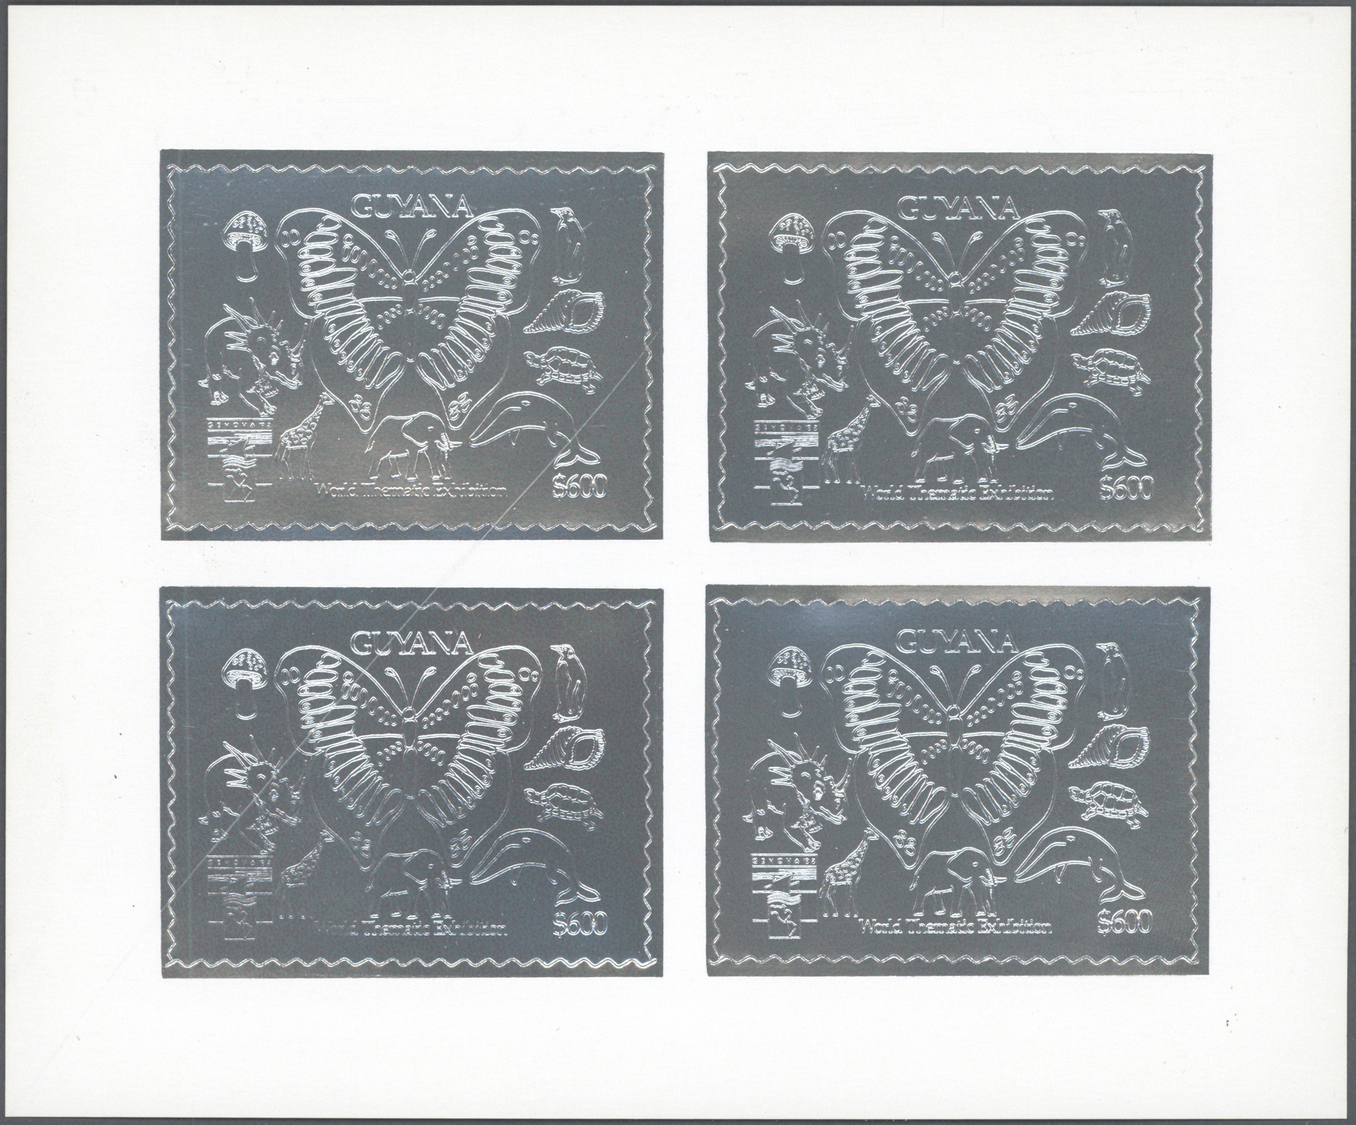 ** Guyana: 1992, International Stamp Exhibition GENOVA'92 complete set of 18 GOLD and SILVER thematic stamps in sheetlet